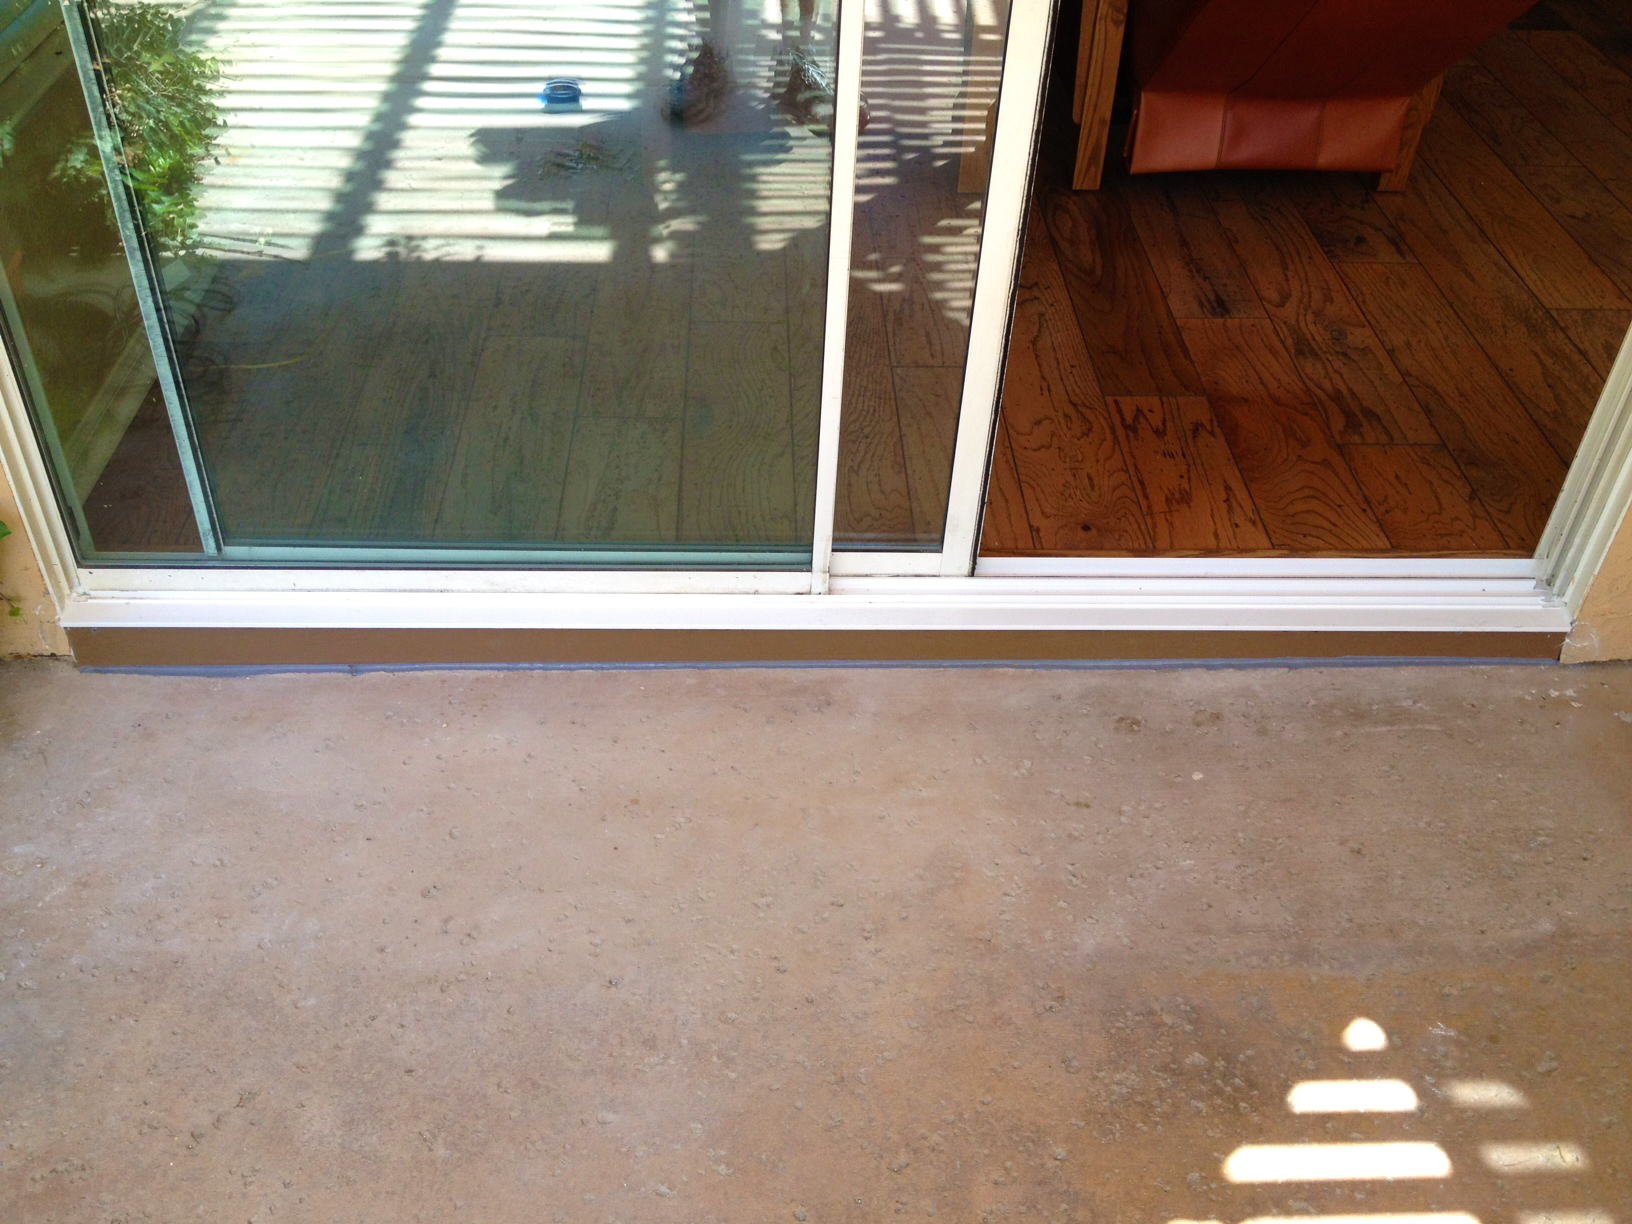 Sliding Door Track Repair San Diego - After 4 - New track and synthetic paint grade lumber sub support in place of that poor stucco installation ads a nice look and helps ensure there's no further corrosion to the new track.